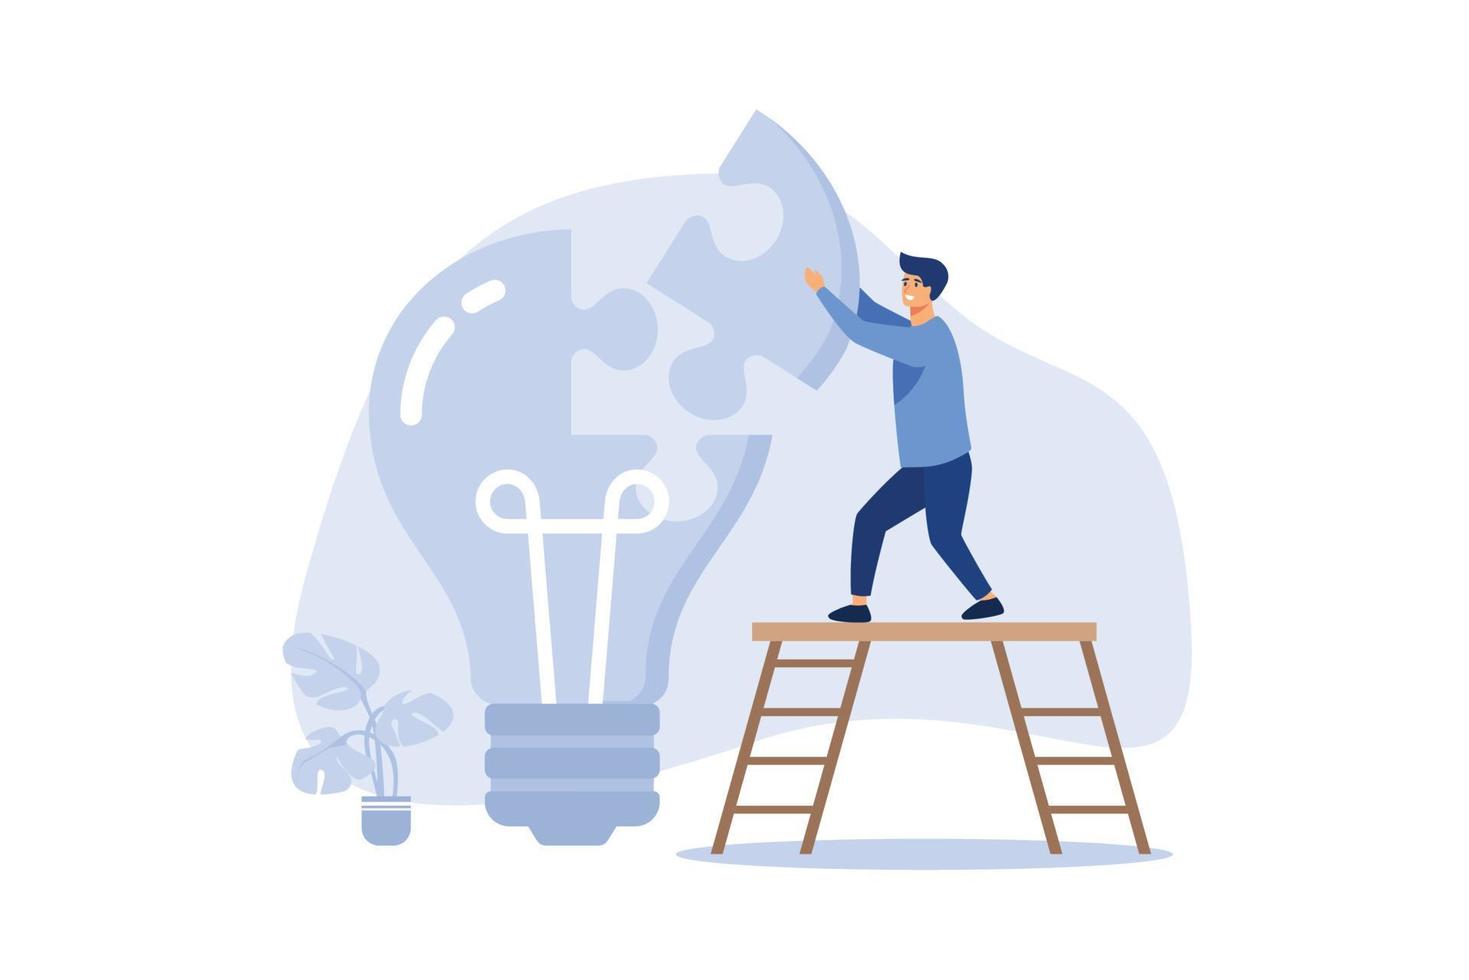 Solve business problem with creativity, finishing or complete brilliant idea, work solution or business idea concept, smart businessman assemble last piece of jigsaw to complete lightbulb idea puzzle. vector